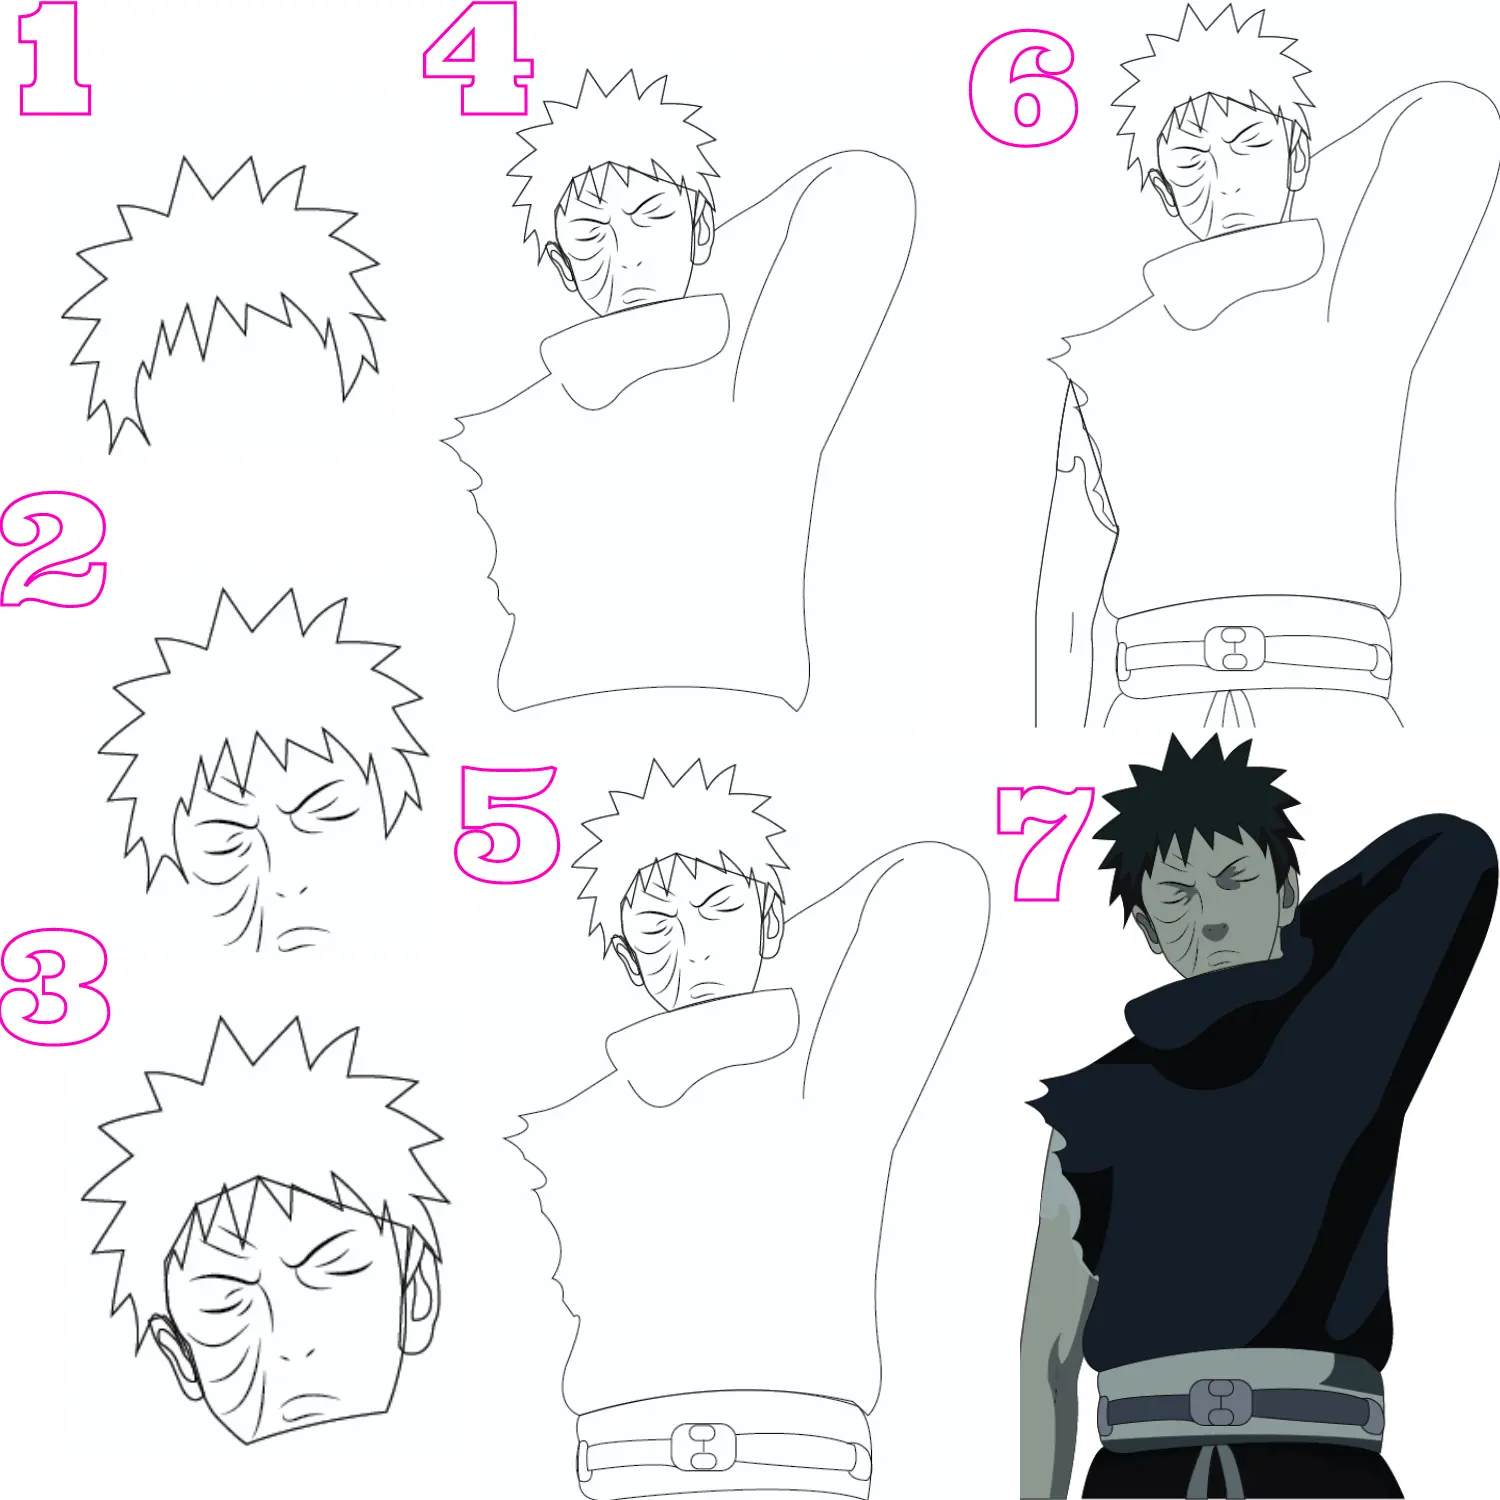 Obito-Uchiha-Drawing-Step-by-Step-Guide